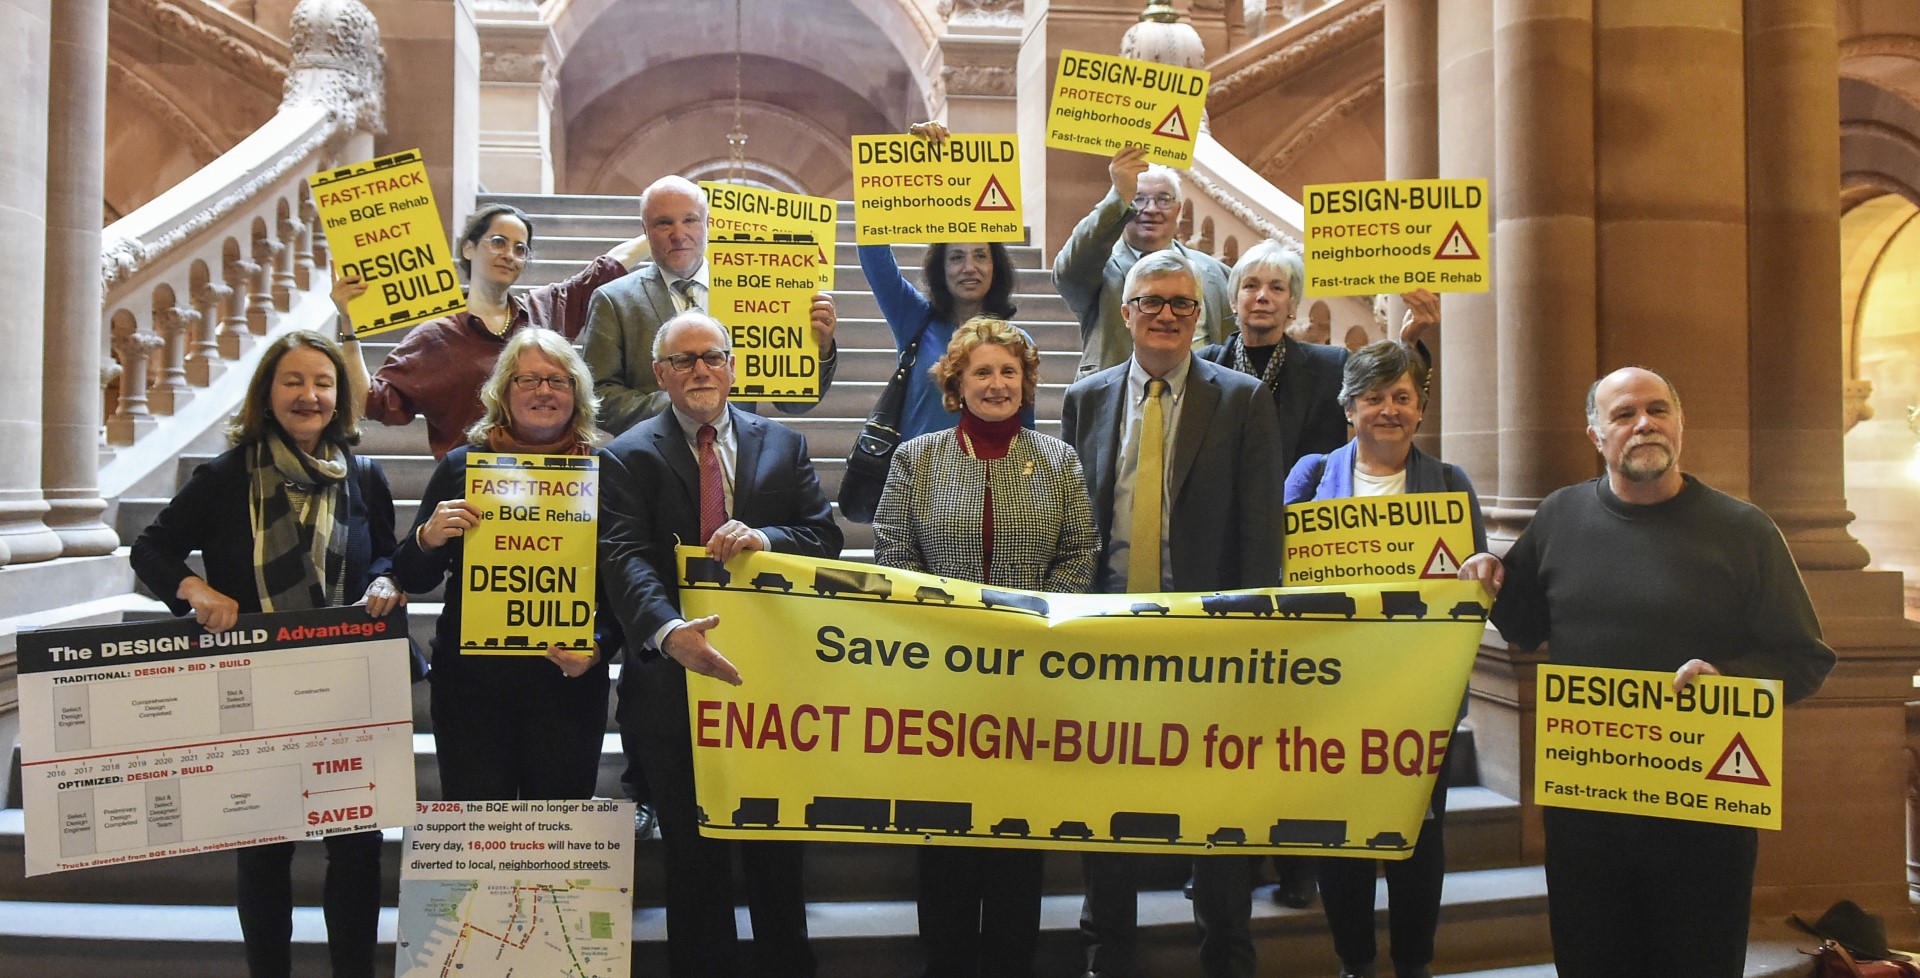 Assemblymember Simon and the Brooklyn Heights Association call for design-build authorization for the BQE repairs.